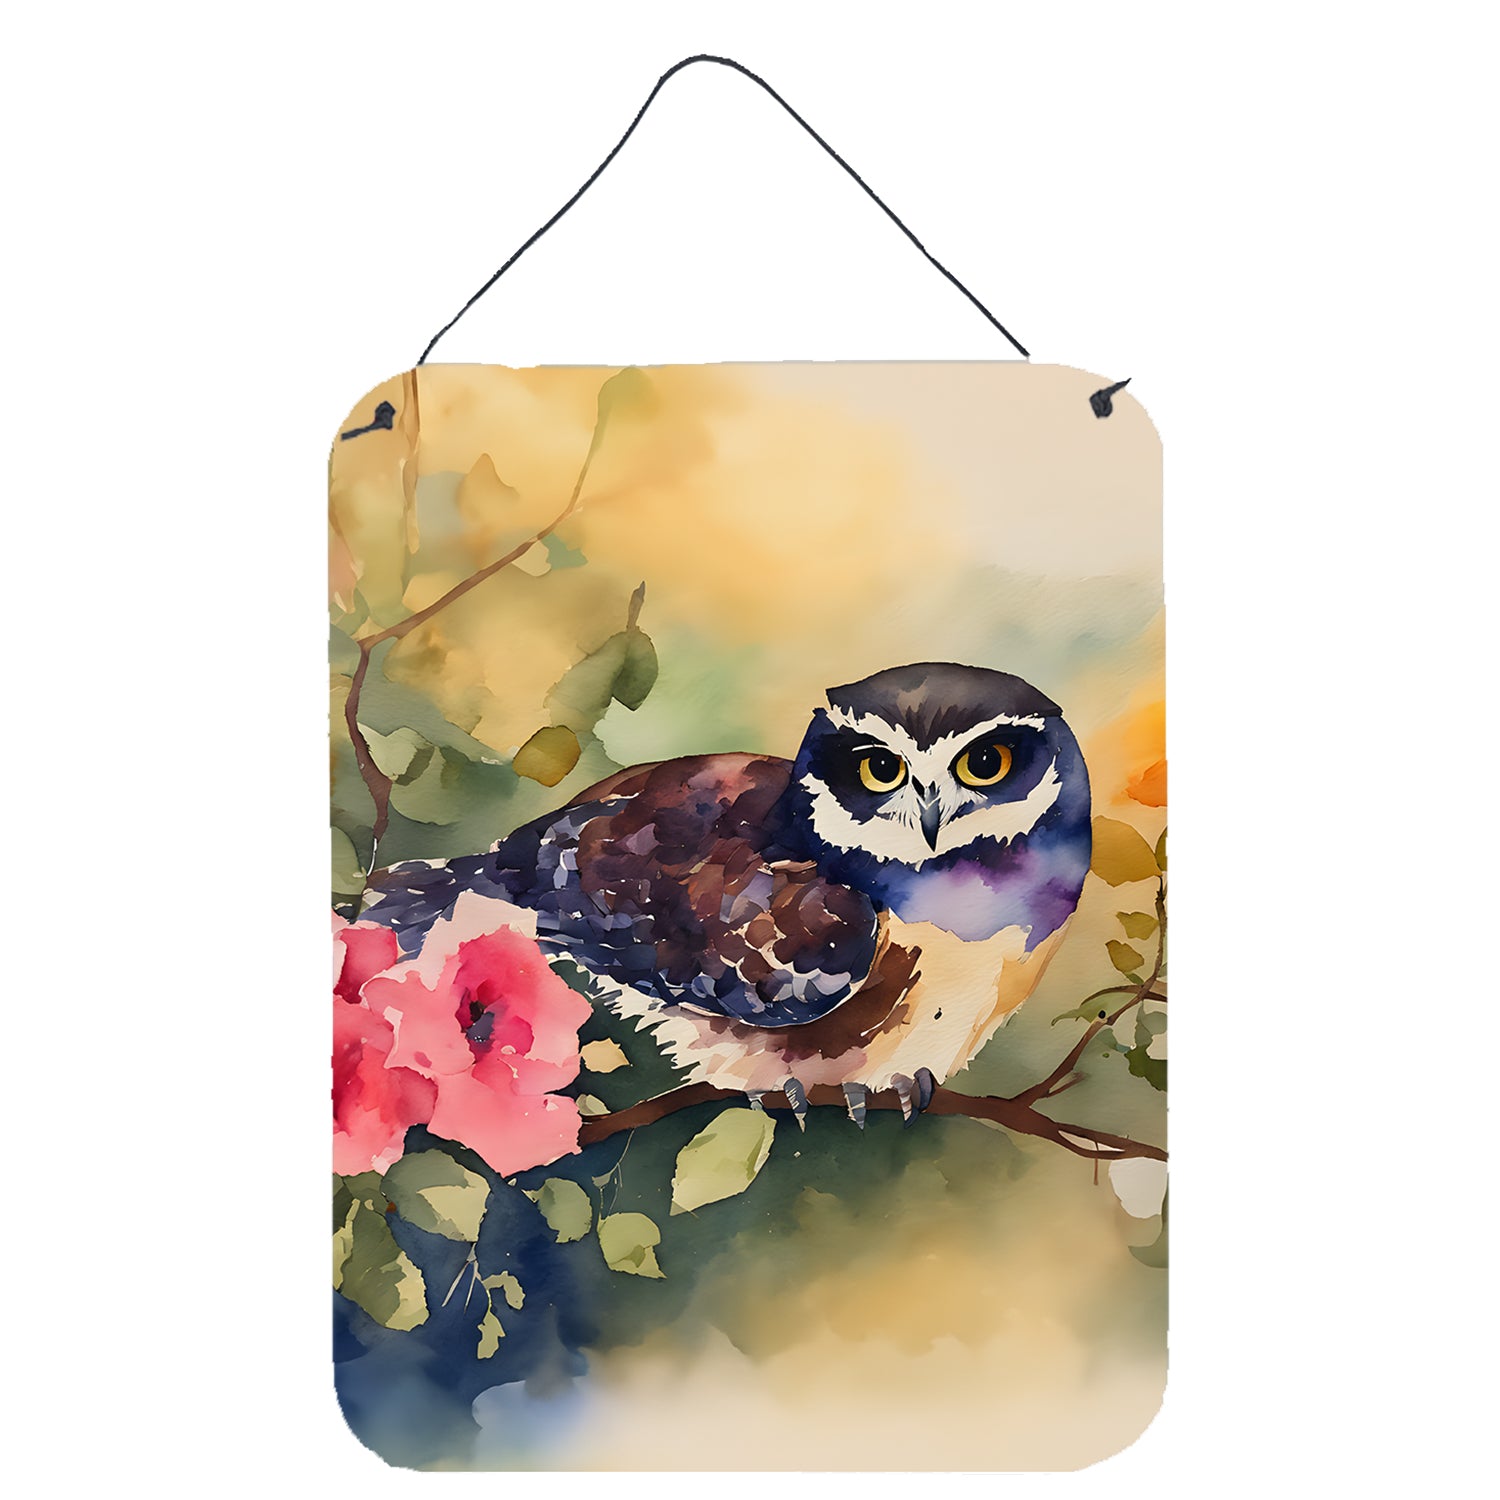 Buy this Spectacled Owl Wall or Door Hanging Prints